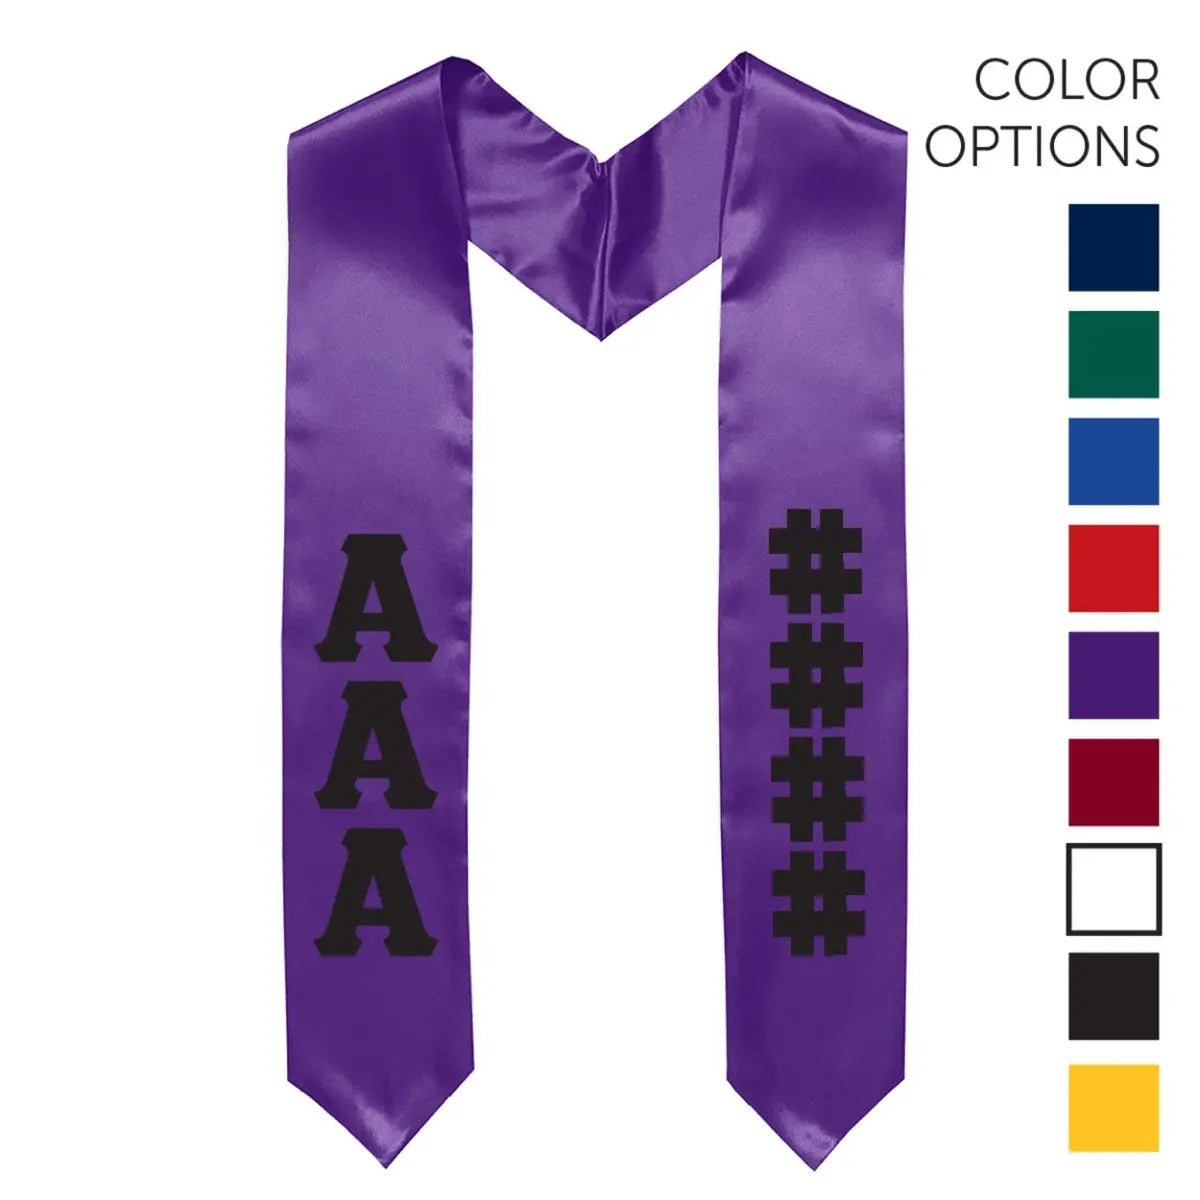 Kappa Sig Pick Your Own Colors Graduation Stole - Kappa Sigma Official Store